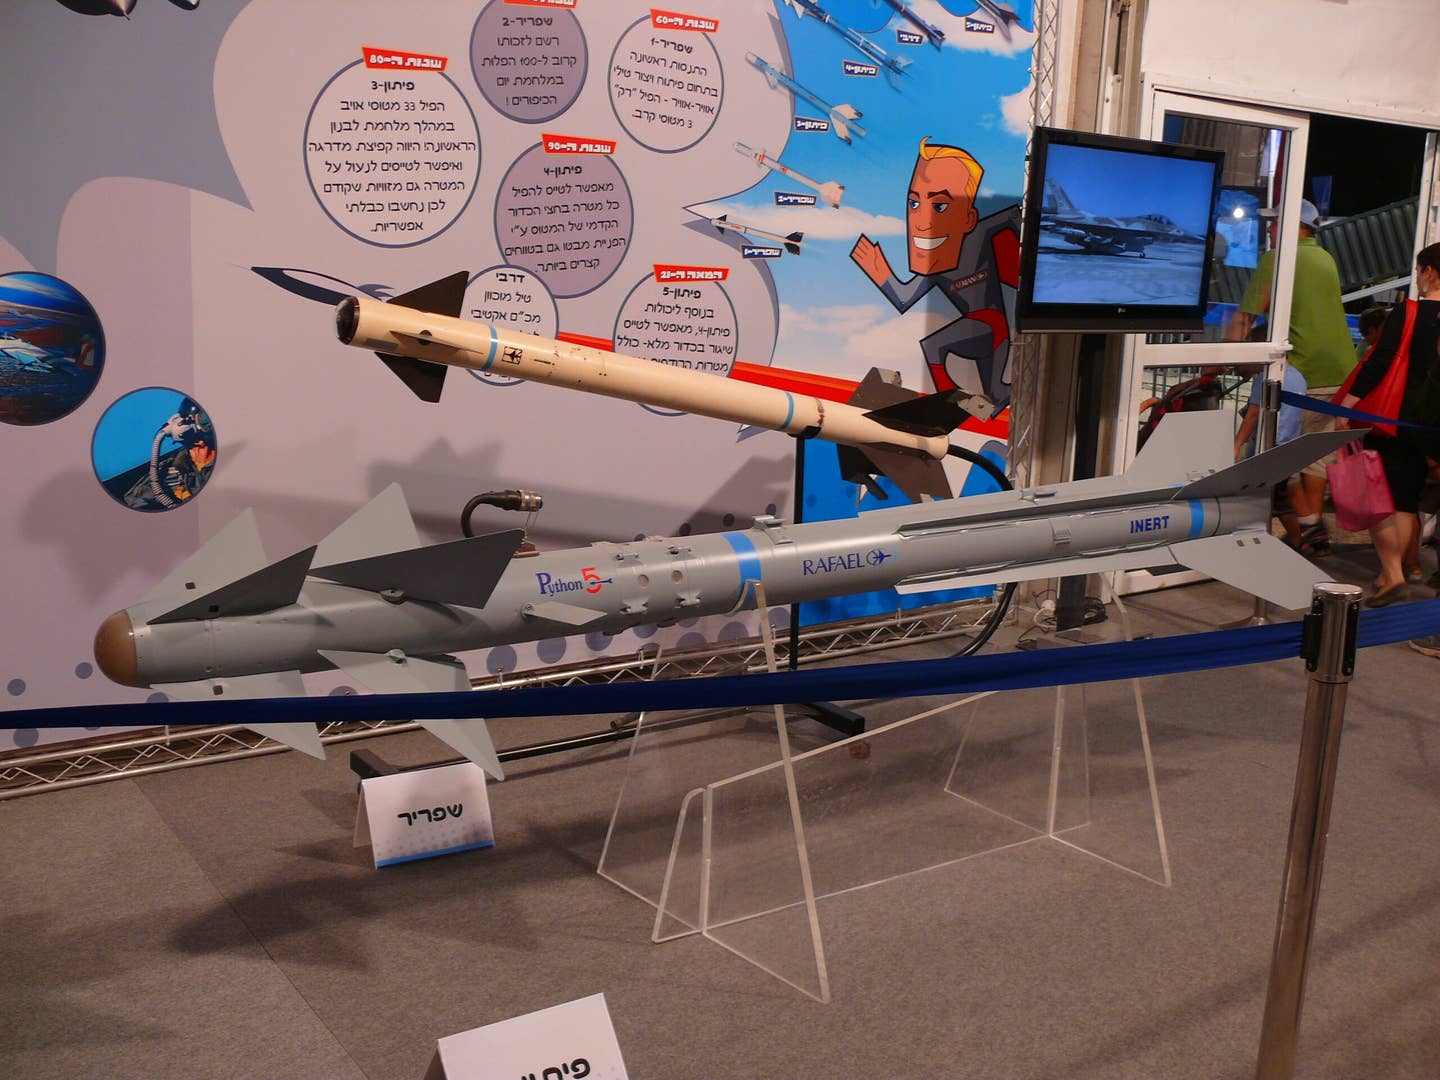 Python 5 mock-up (front) and first-generation Shafrir 1 (back) air-to-air missiles on display. <em>MathKnight/Wikimedia Commons</em>